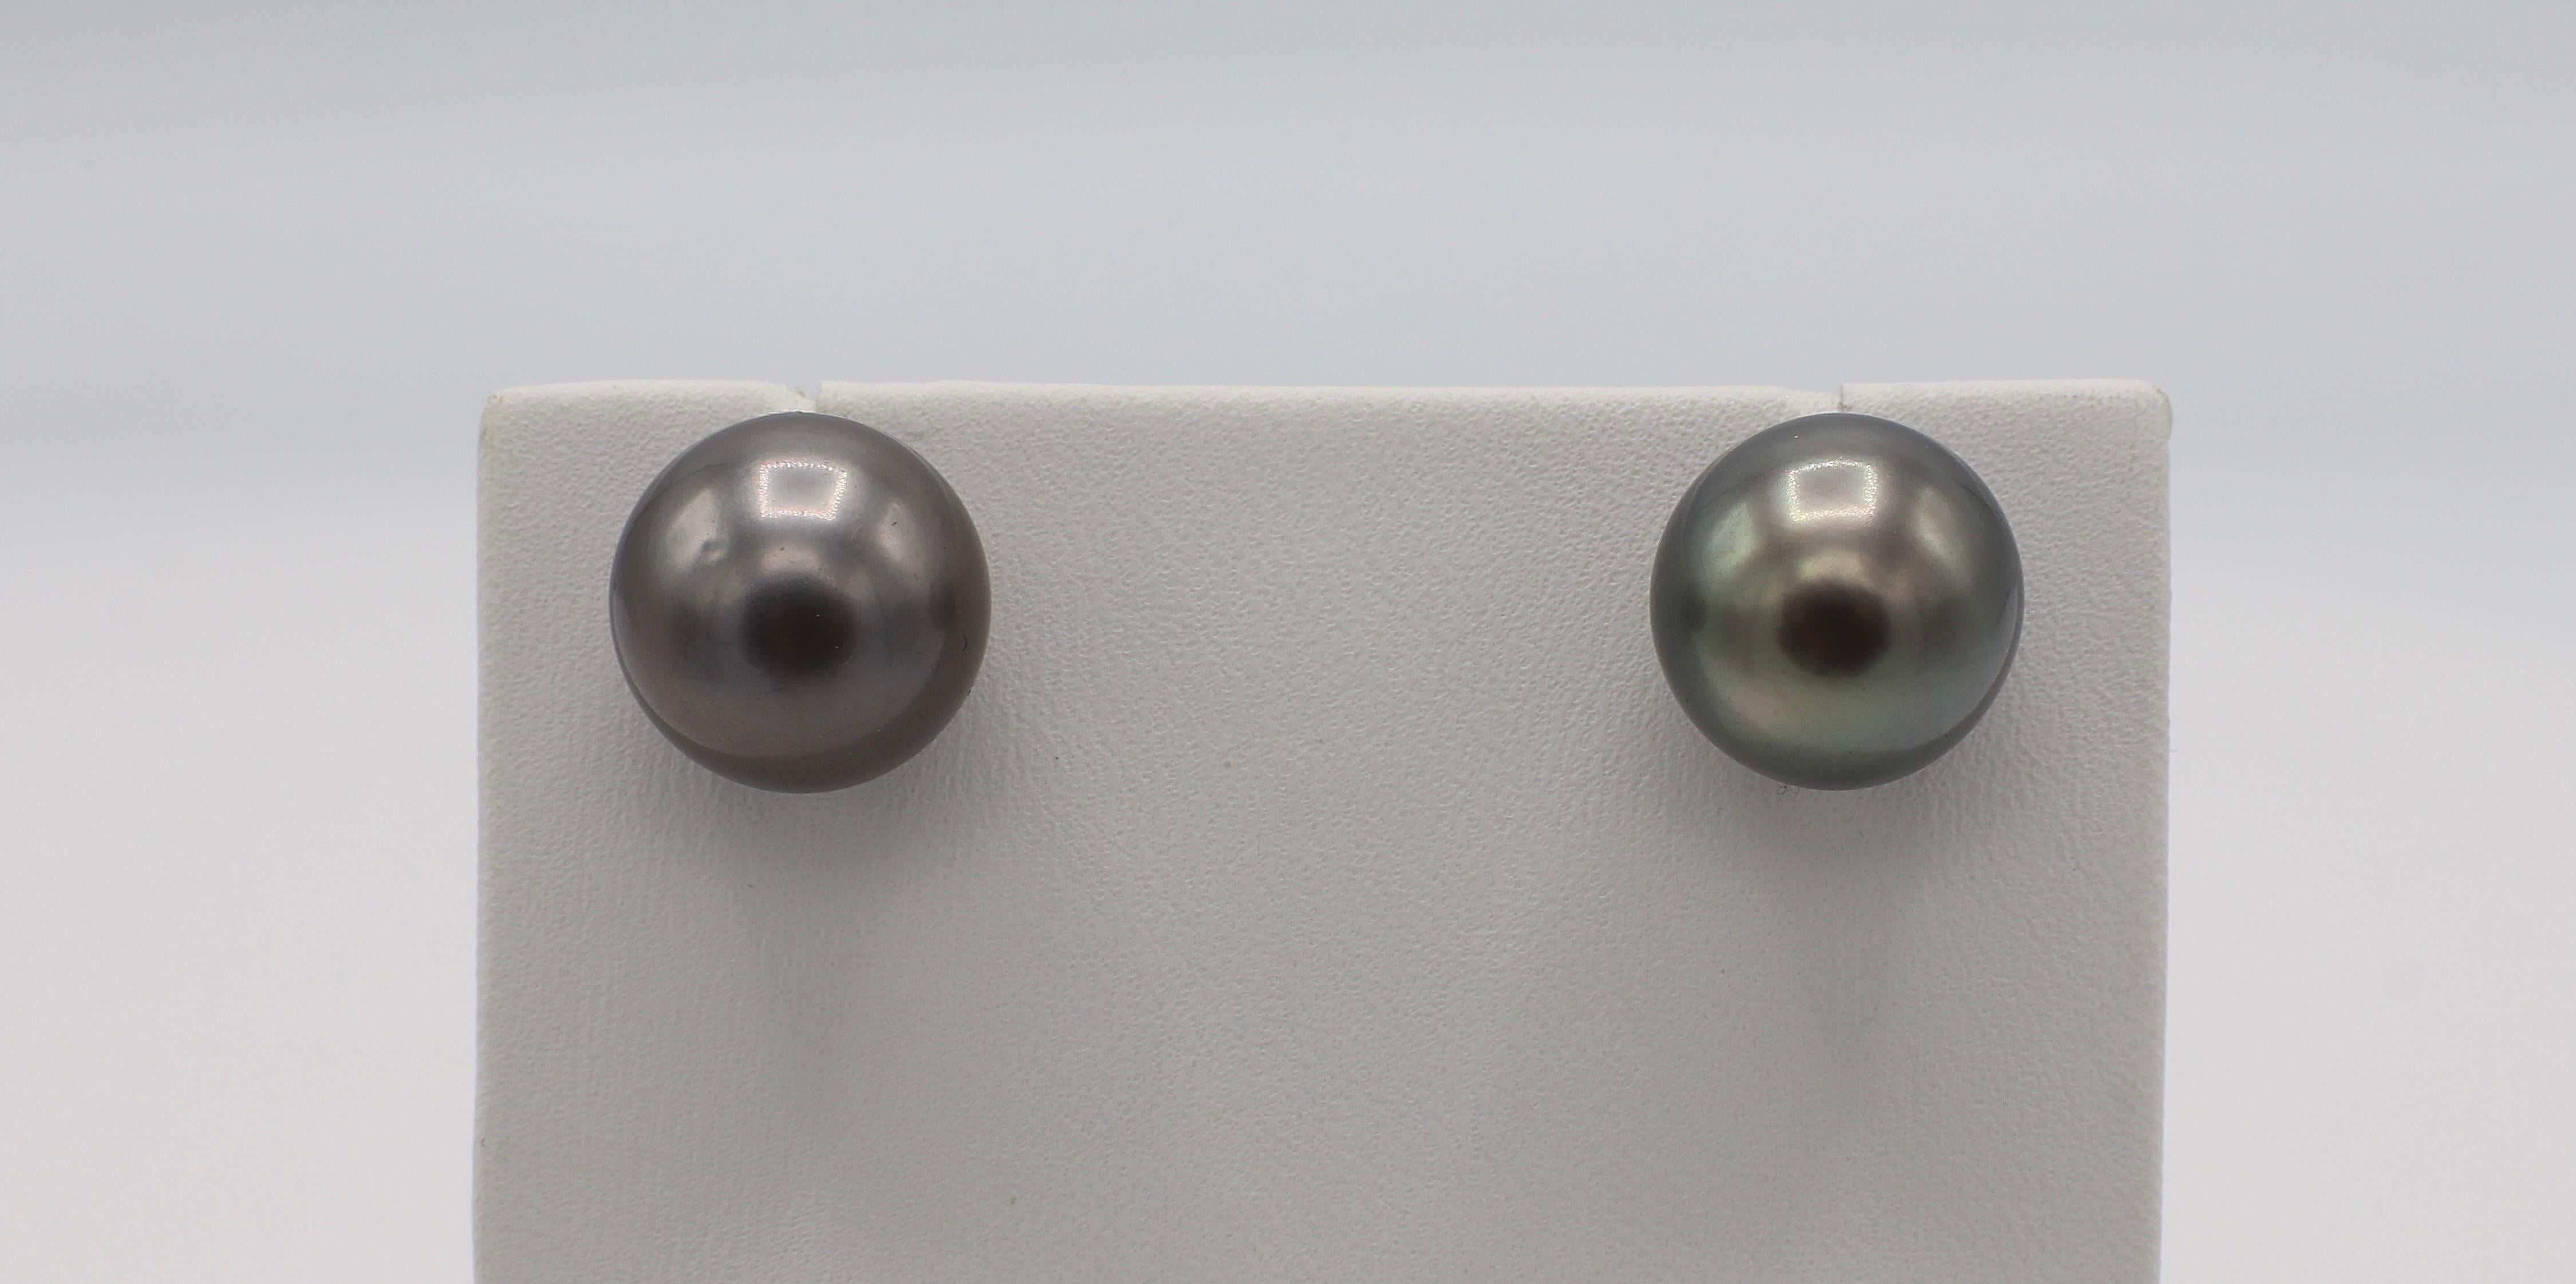 14 Karat White Gold 13MM Tahitian Pearl Stud Earrings 
Metal: 14K white gold
Weight: 7.59 grams
Pearls: 2 gray Tahitian 13mm pearls with high luster and beautiful color
